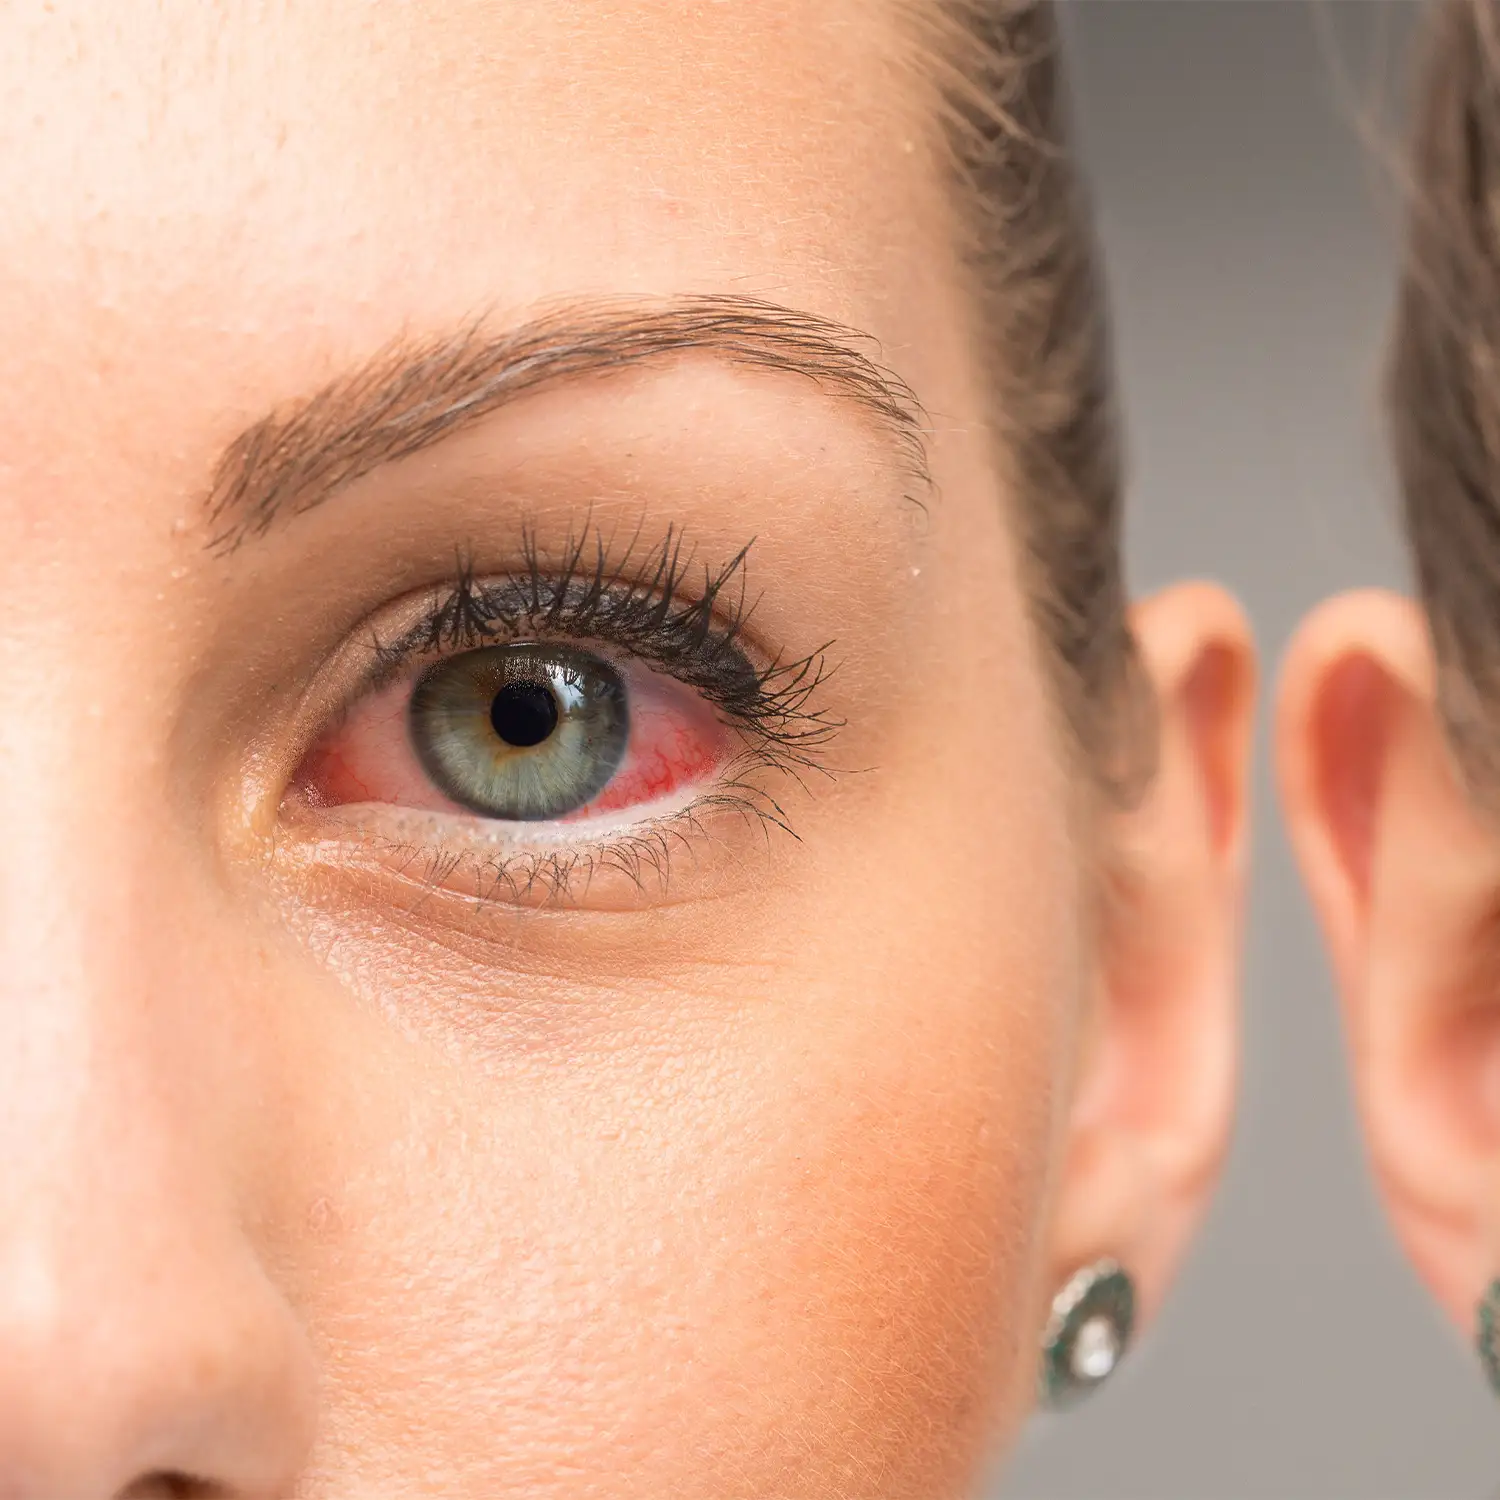 8 Great Home Remedies For Eye Infection